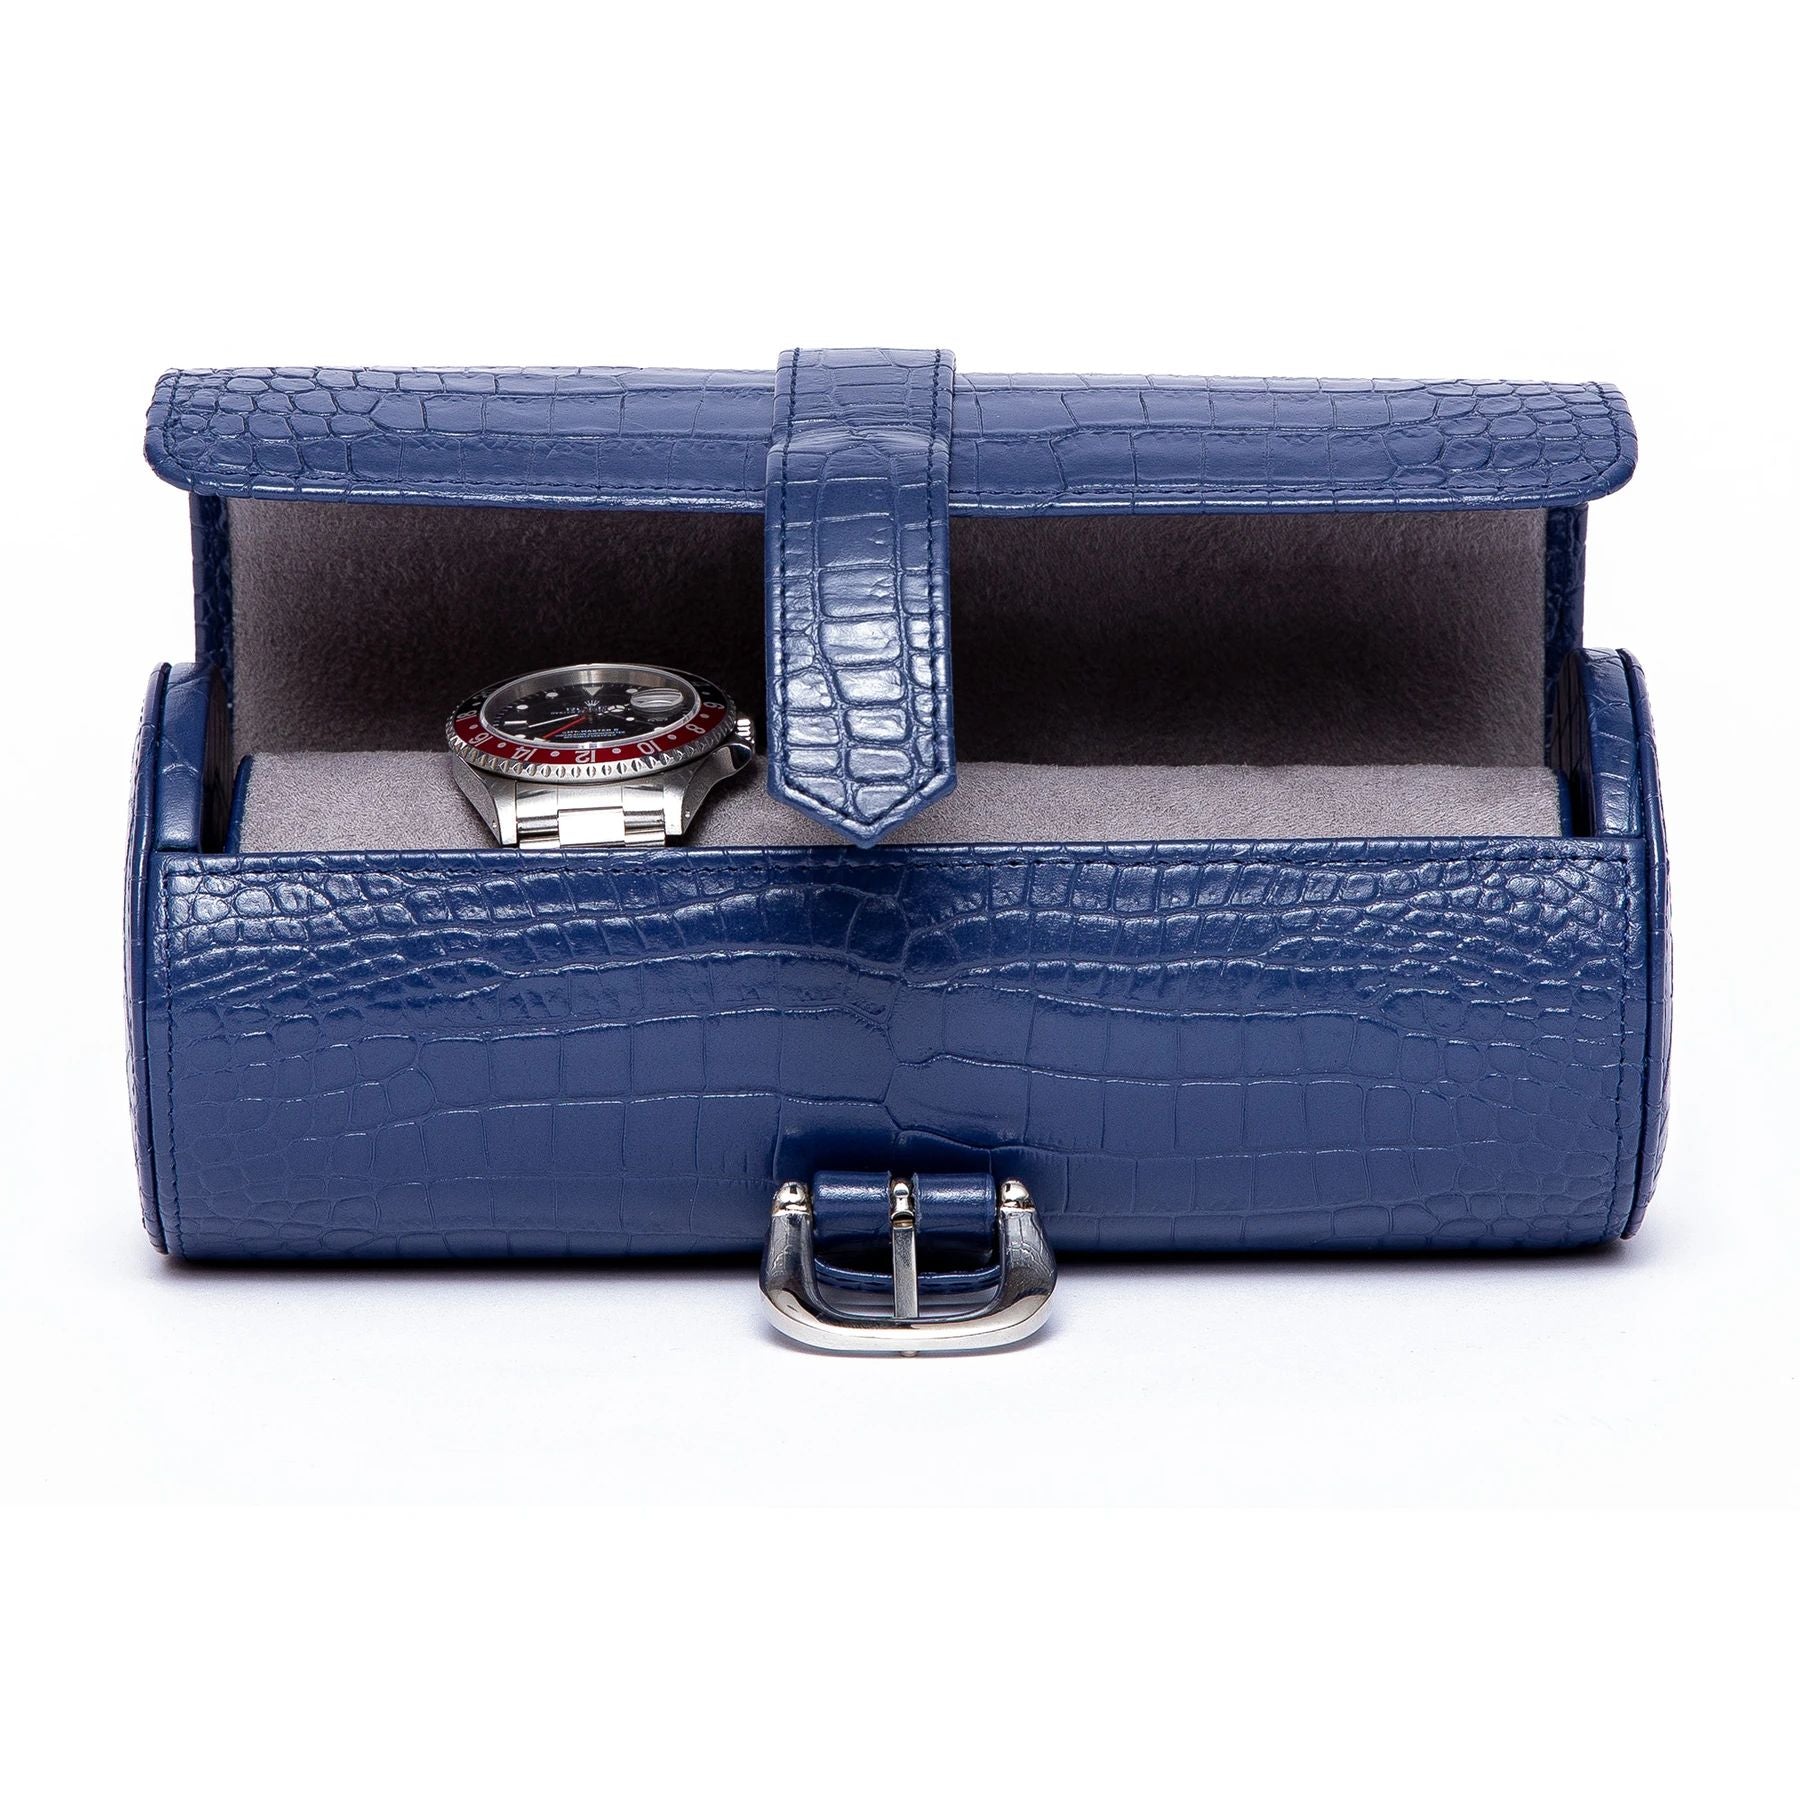 Brompton 3 Watch Roll - Blue by  Rapport London |  Time Keeper.